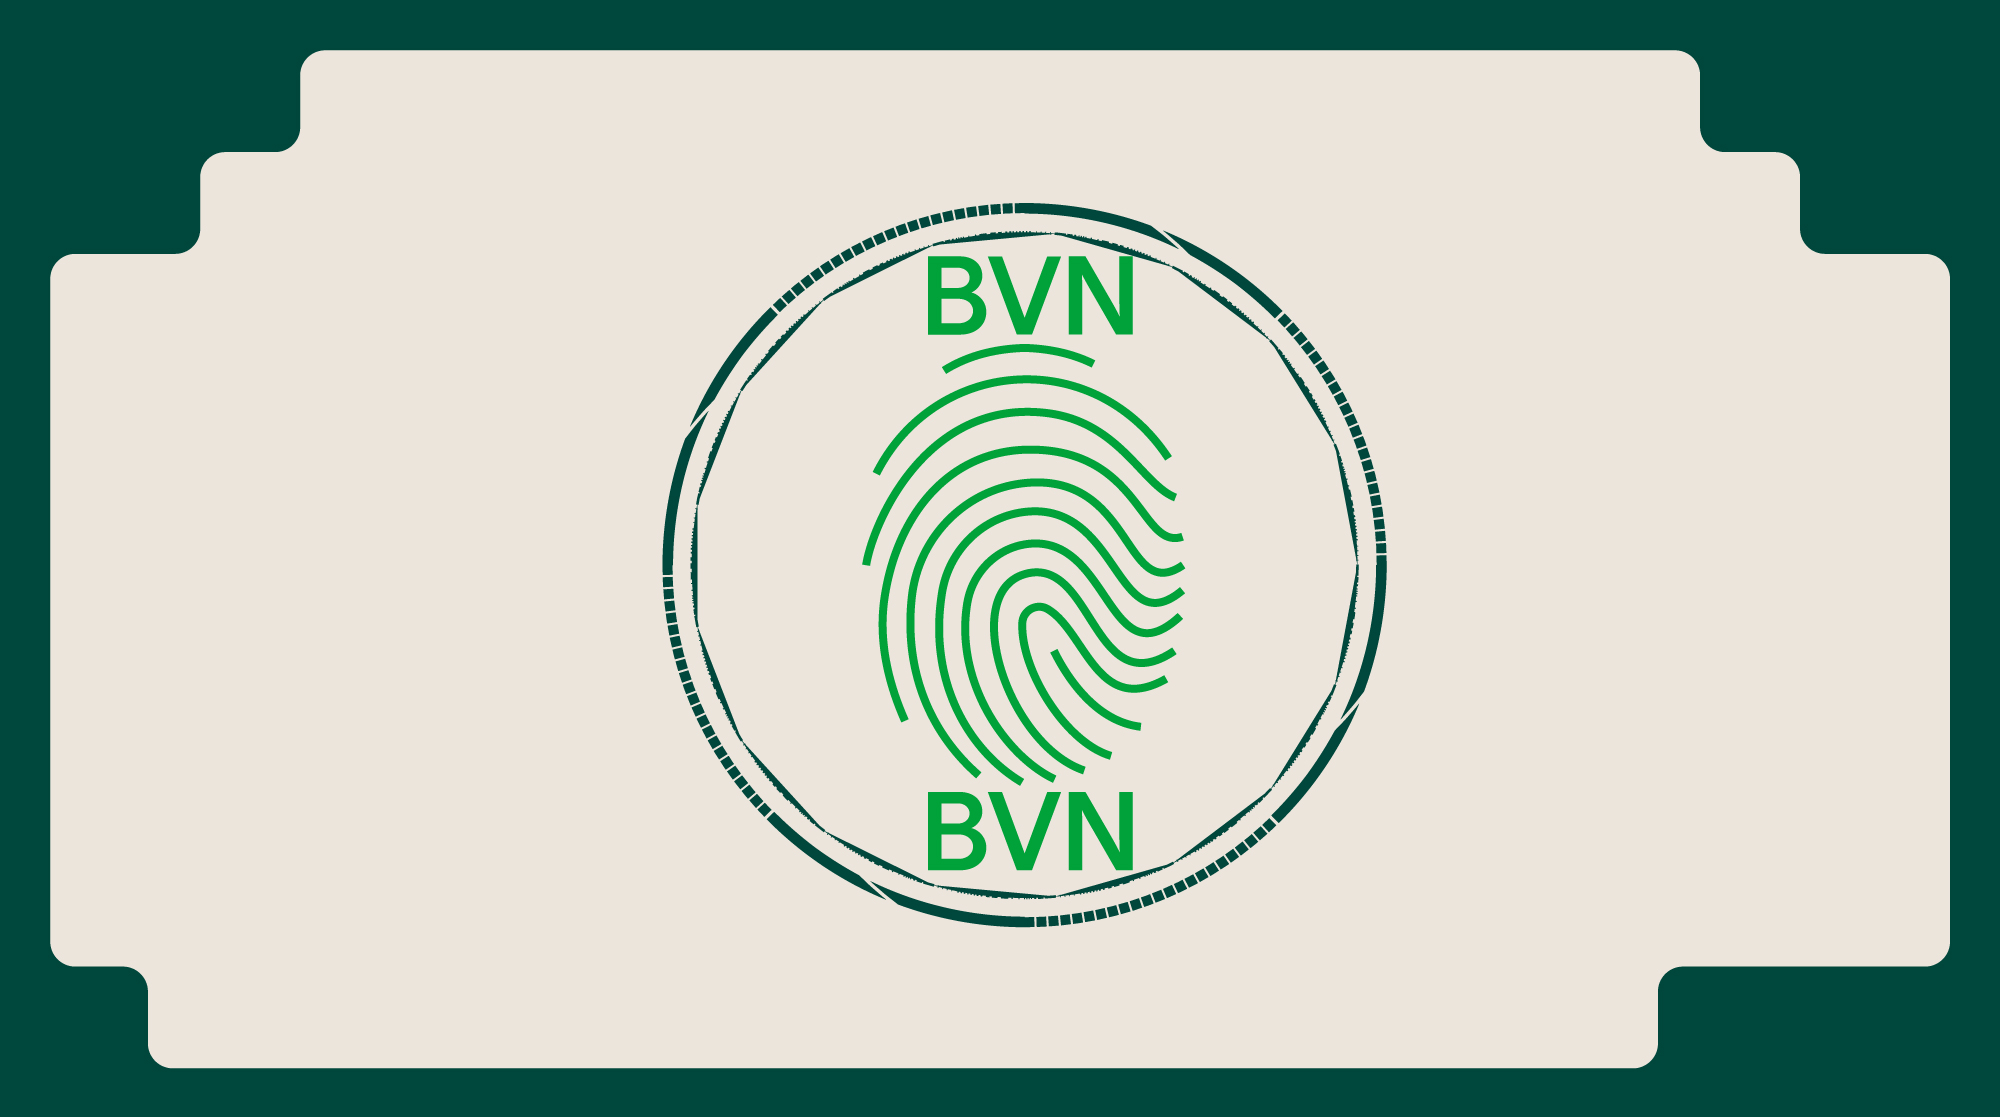 How to Check BVN Online in Nigeria